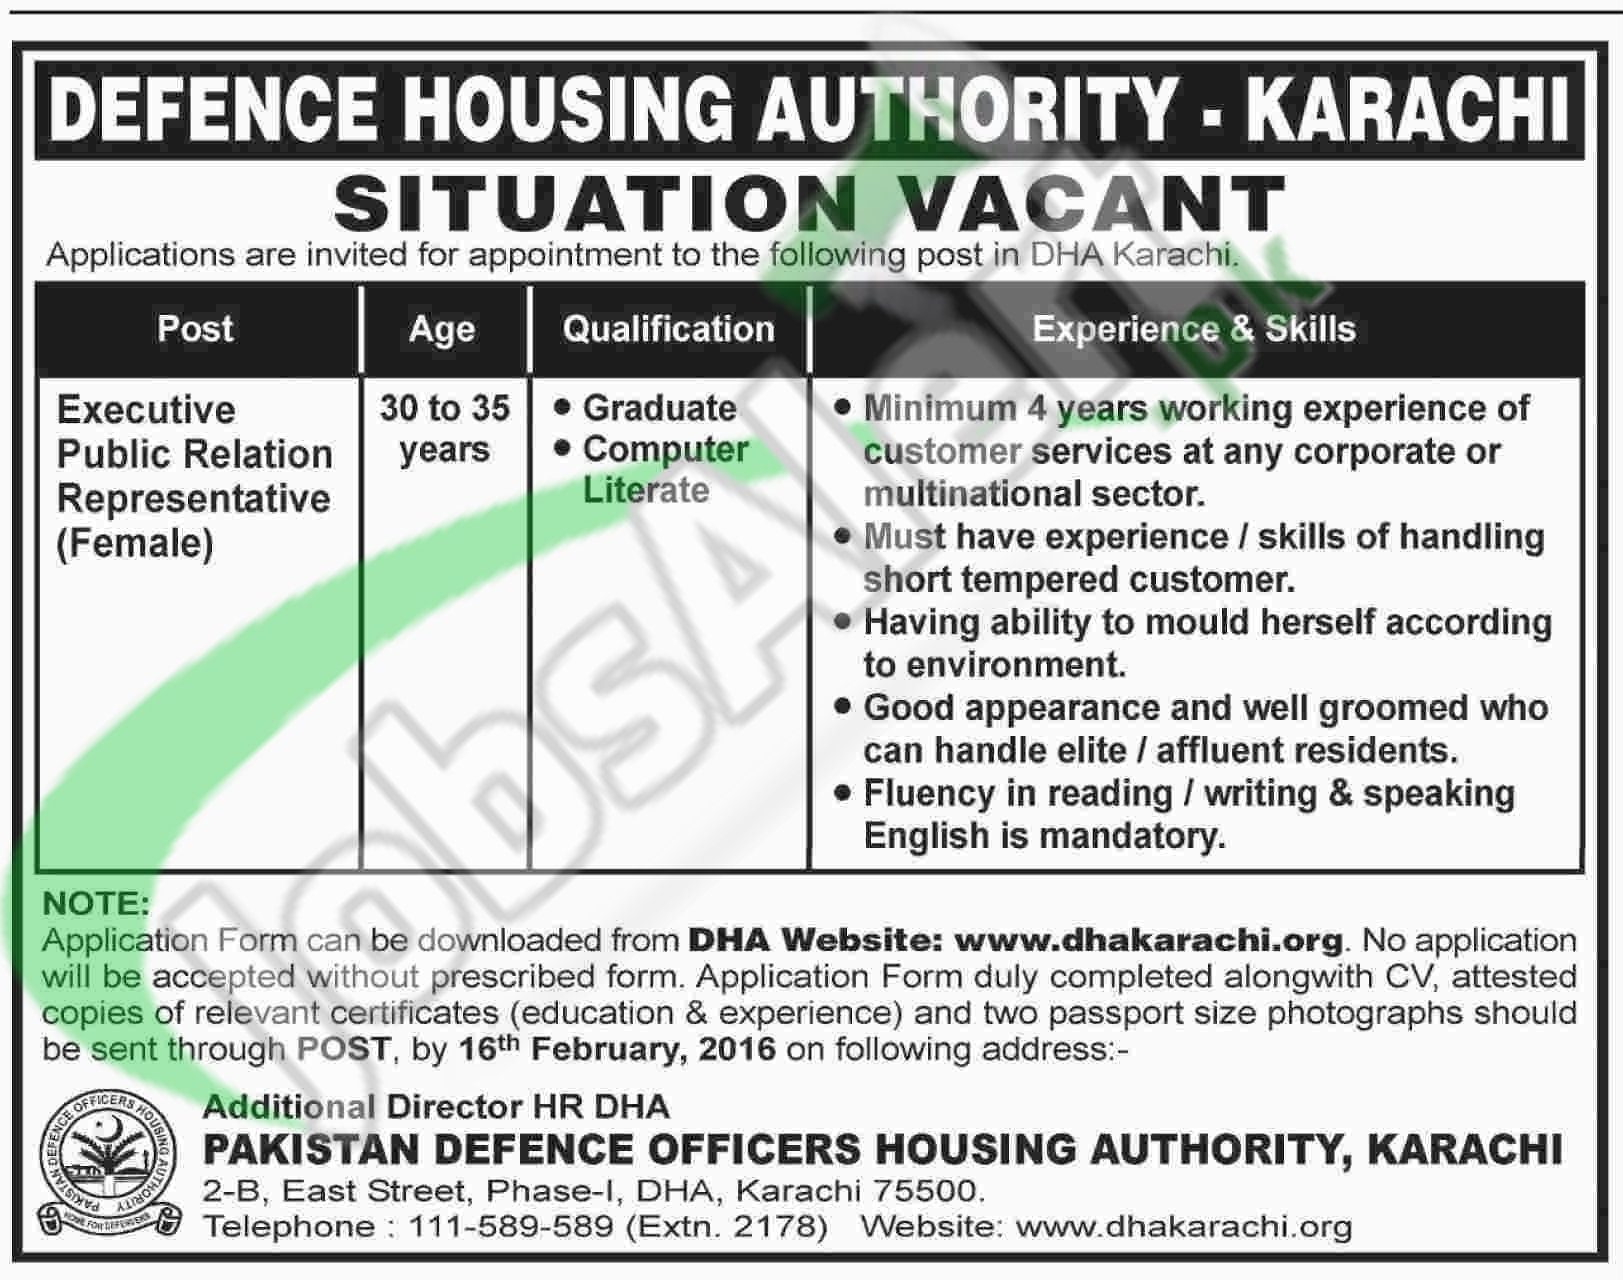 Situations Vacant in DHA Housing Authority Karachi 2016